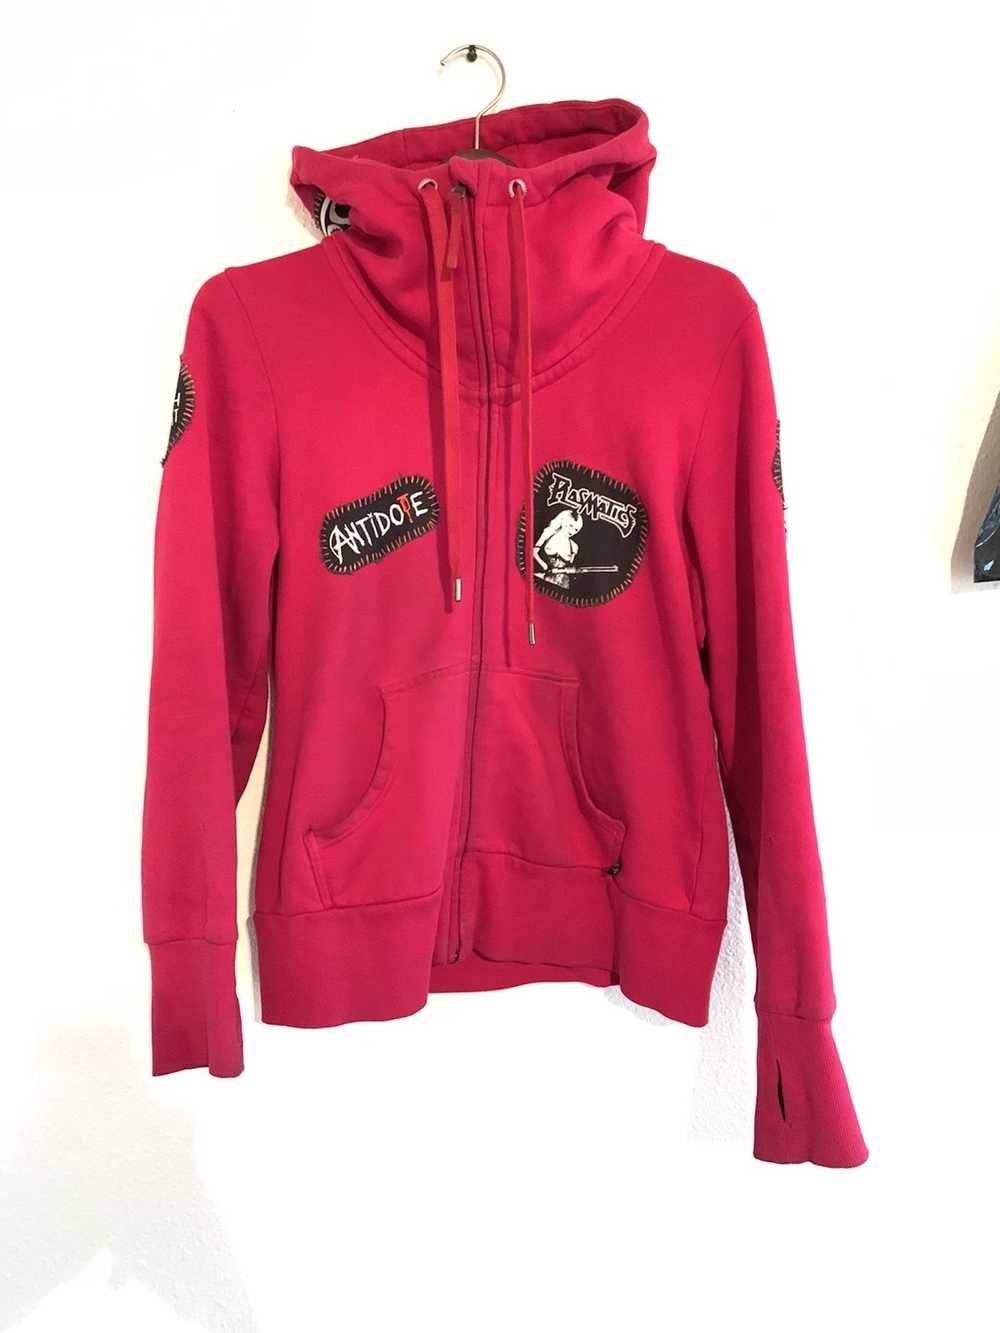 Other Custom seditionaries patched hoodie - image 1